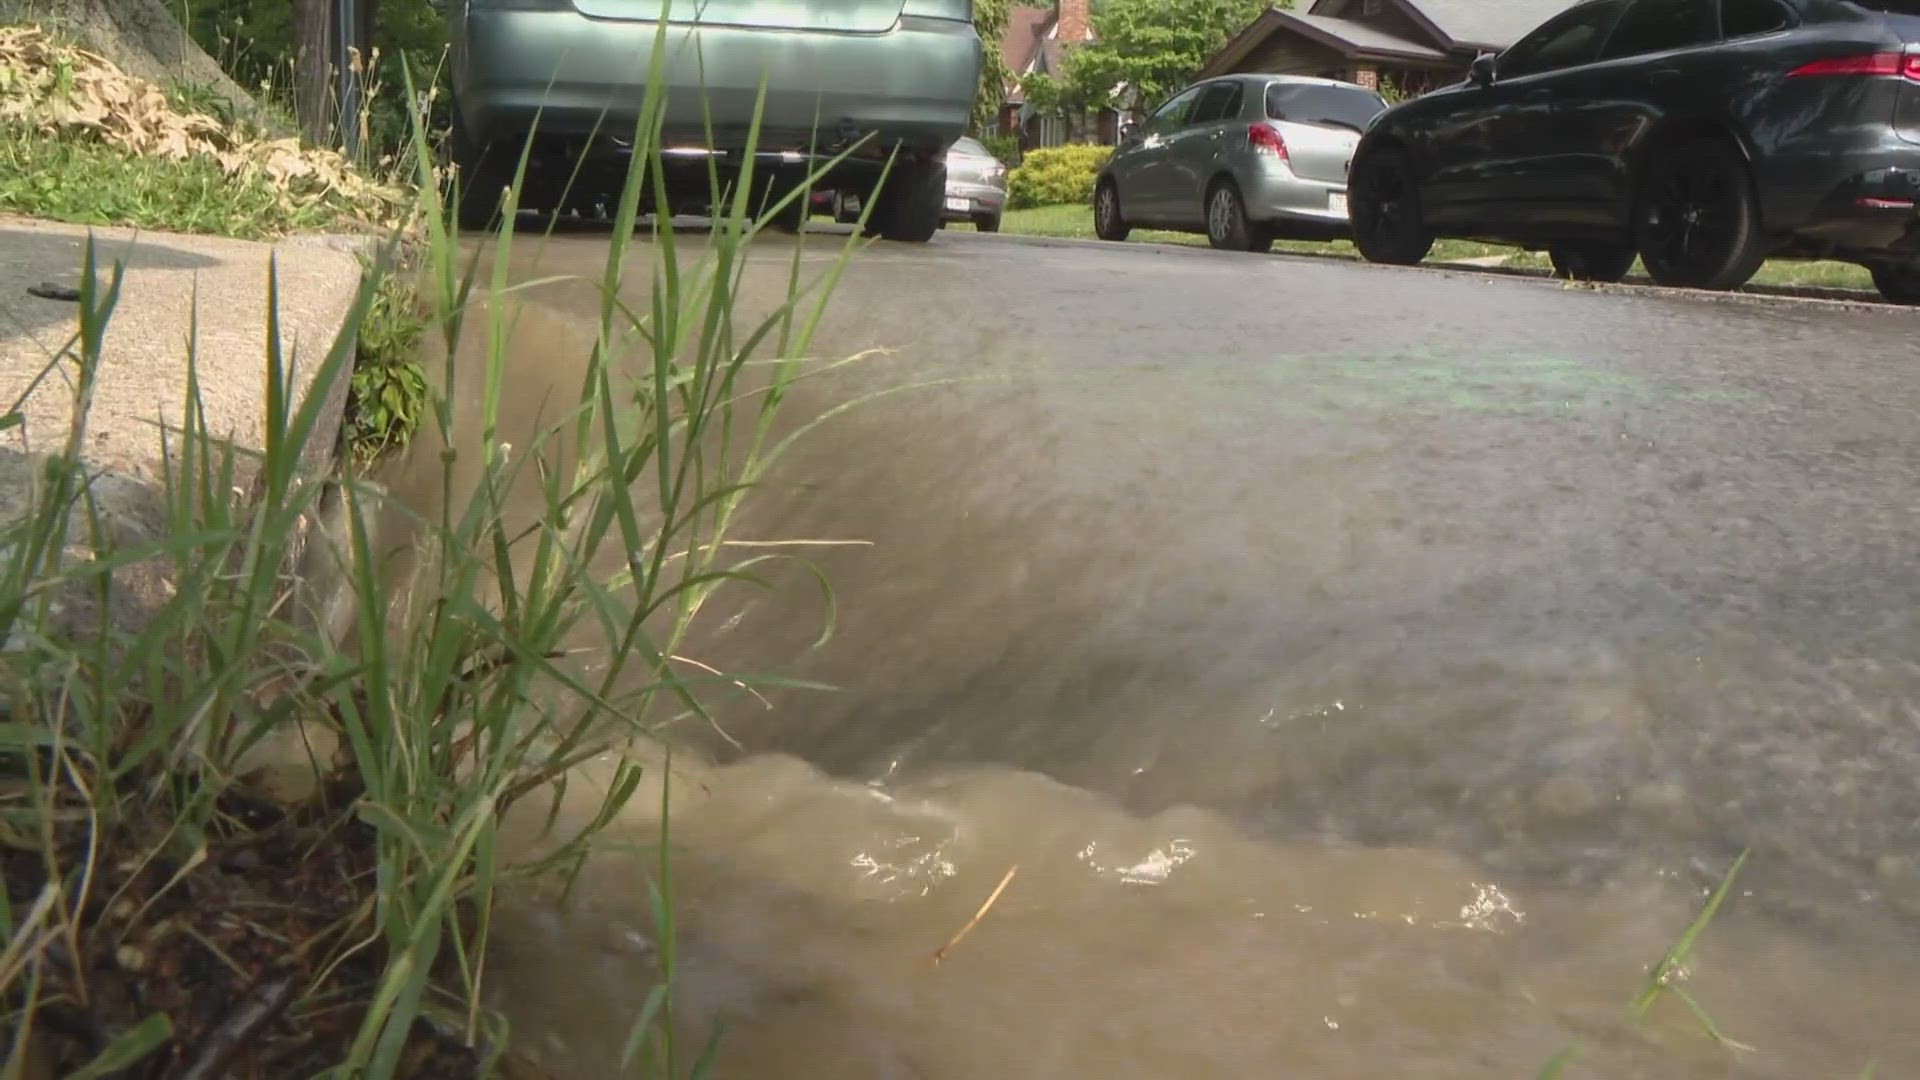 St. Louisans concerned as water main breaks continue, rate increase looms. St. Louis City leaders are getting even closer to approving a 40% water rate increase.